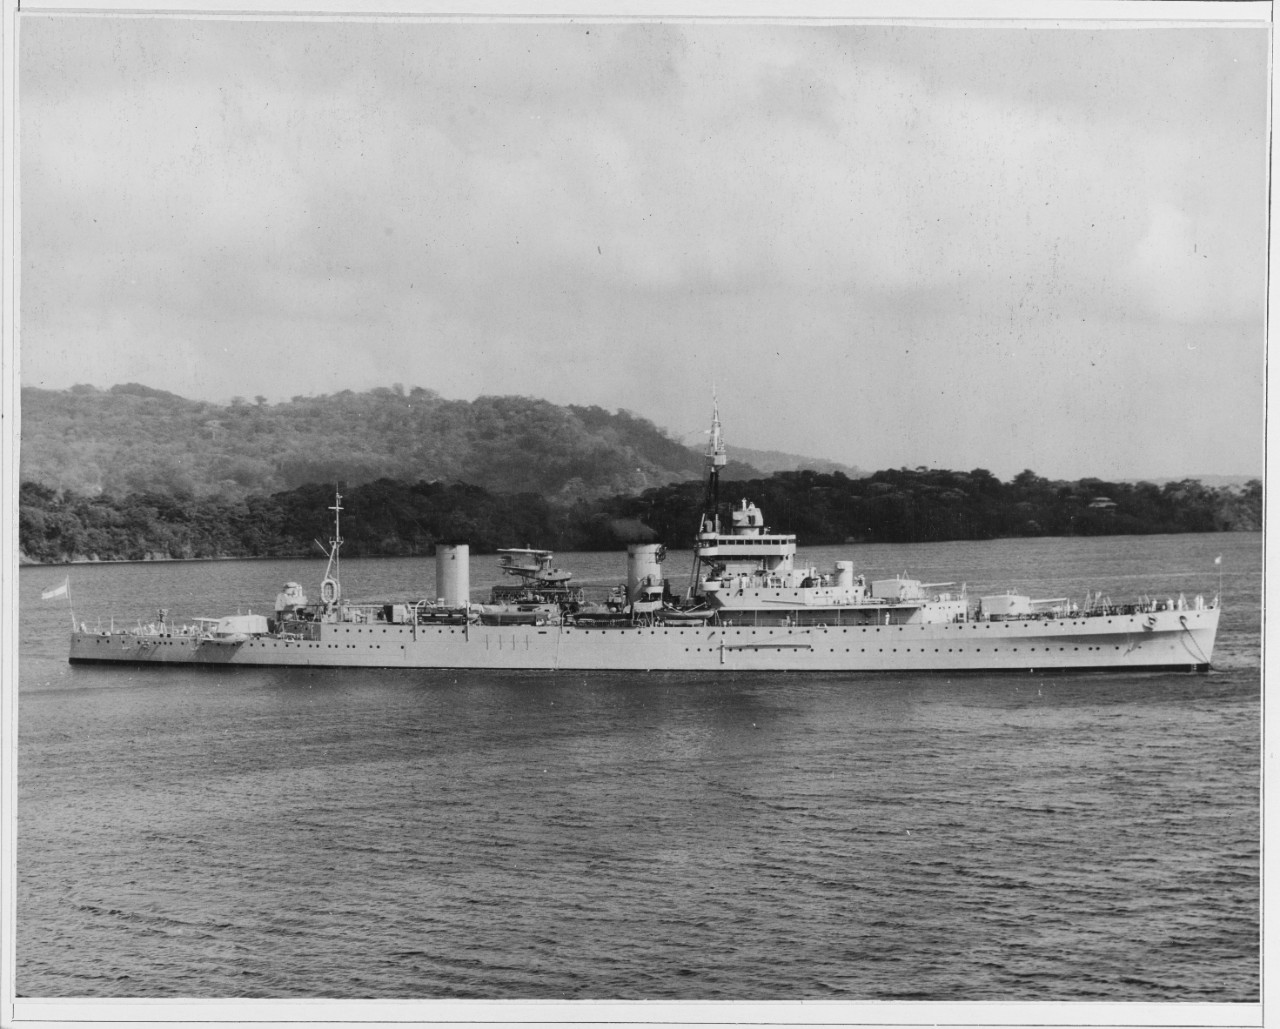 LA ARGENTINA, Argentine cruiser, 1937, off the Panama Canal, 2 May 1940